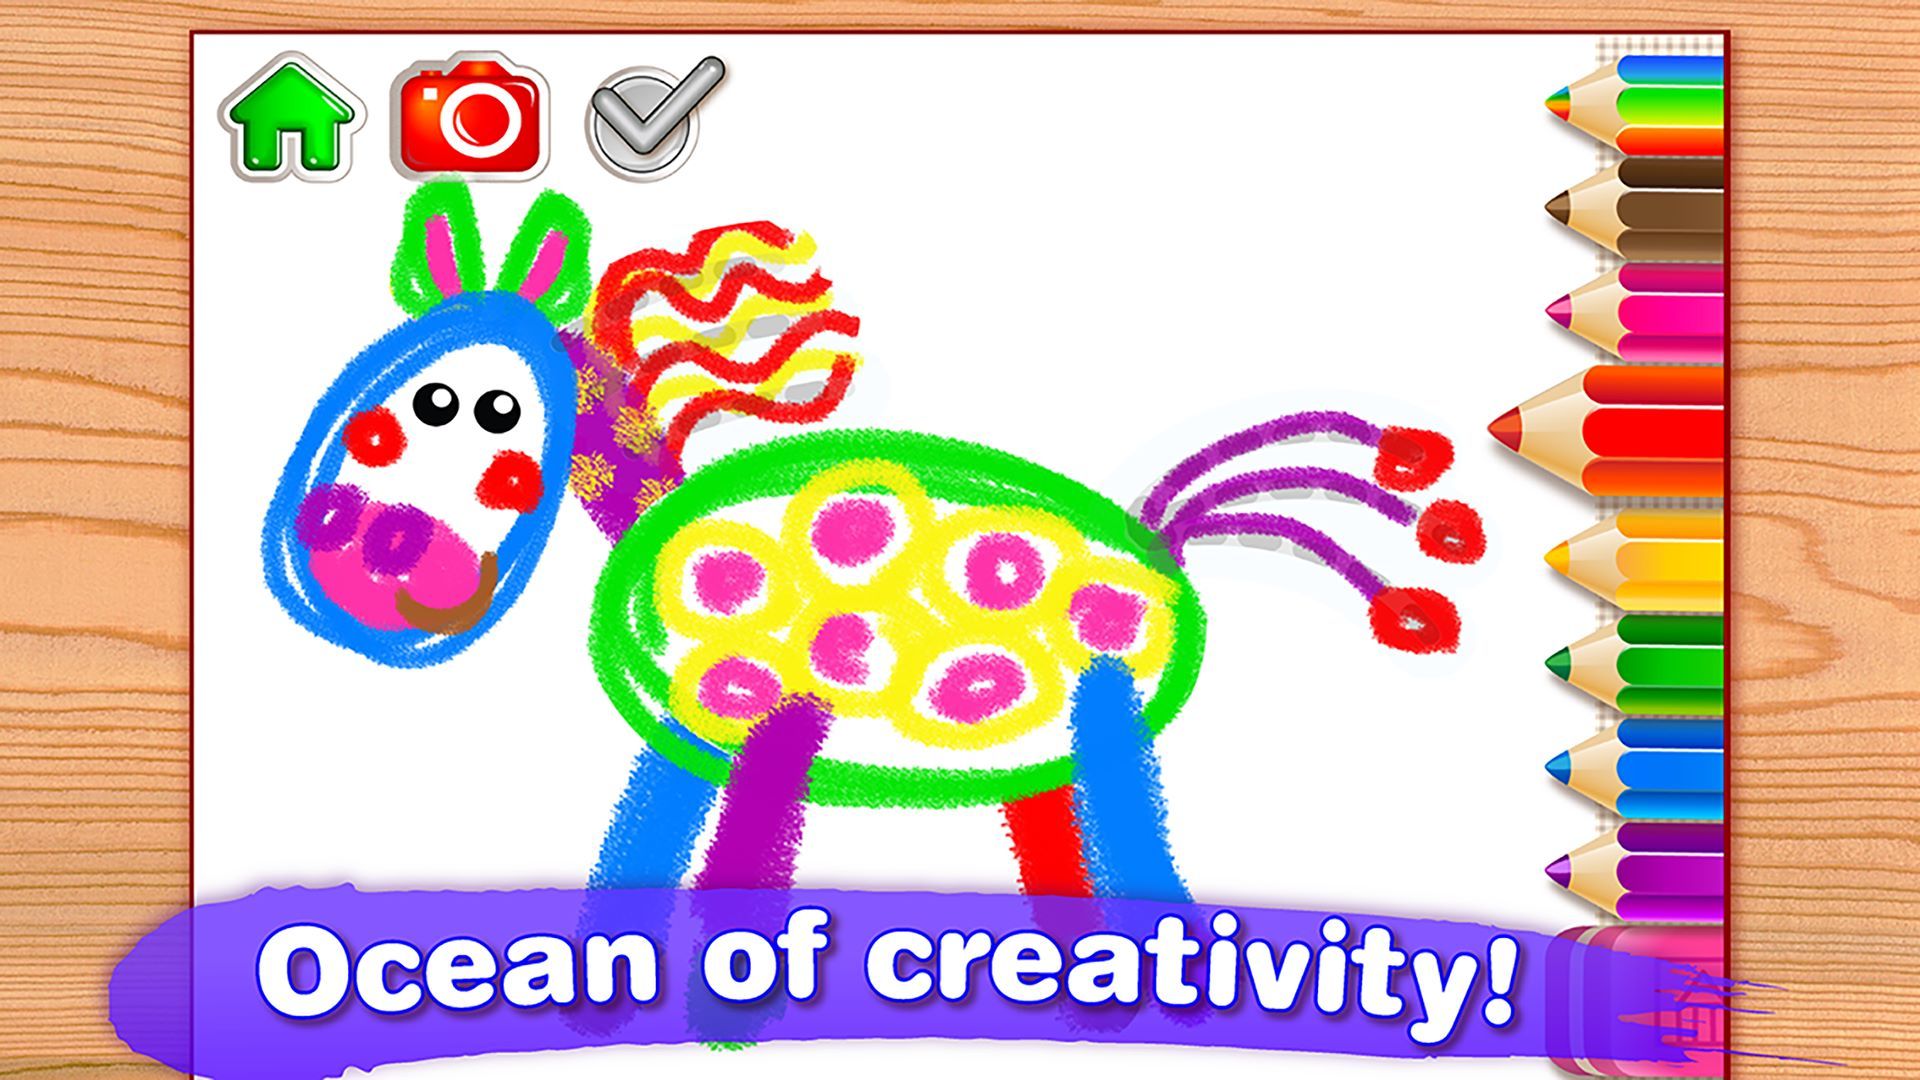 DRAWING FOR KIDS: ALL DRAWINGS COME TO LIFE! Babies Learn to Draw Animals in Coloring Book & Baby Painting Games for Kindergarten! Children Animal Learning Toddlers Apps! Toddler Educational Paint Game 4 Preschoolers FREE 2, 3, 5 Year Olds Girls Boys